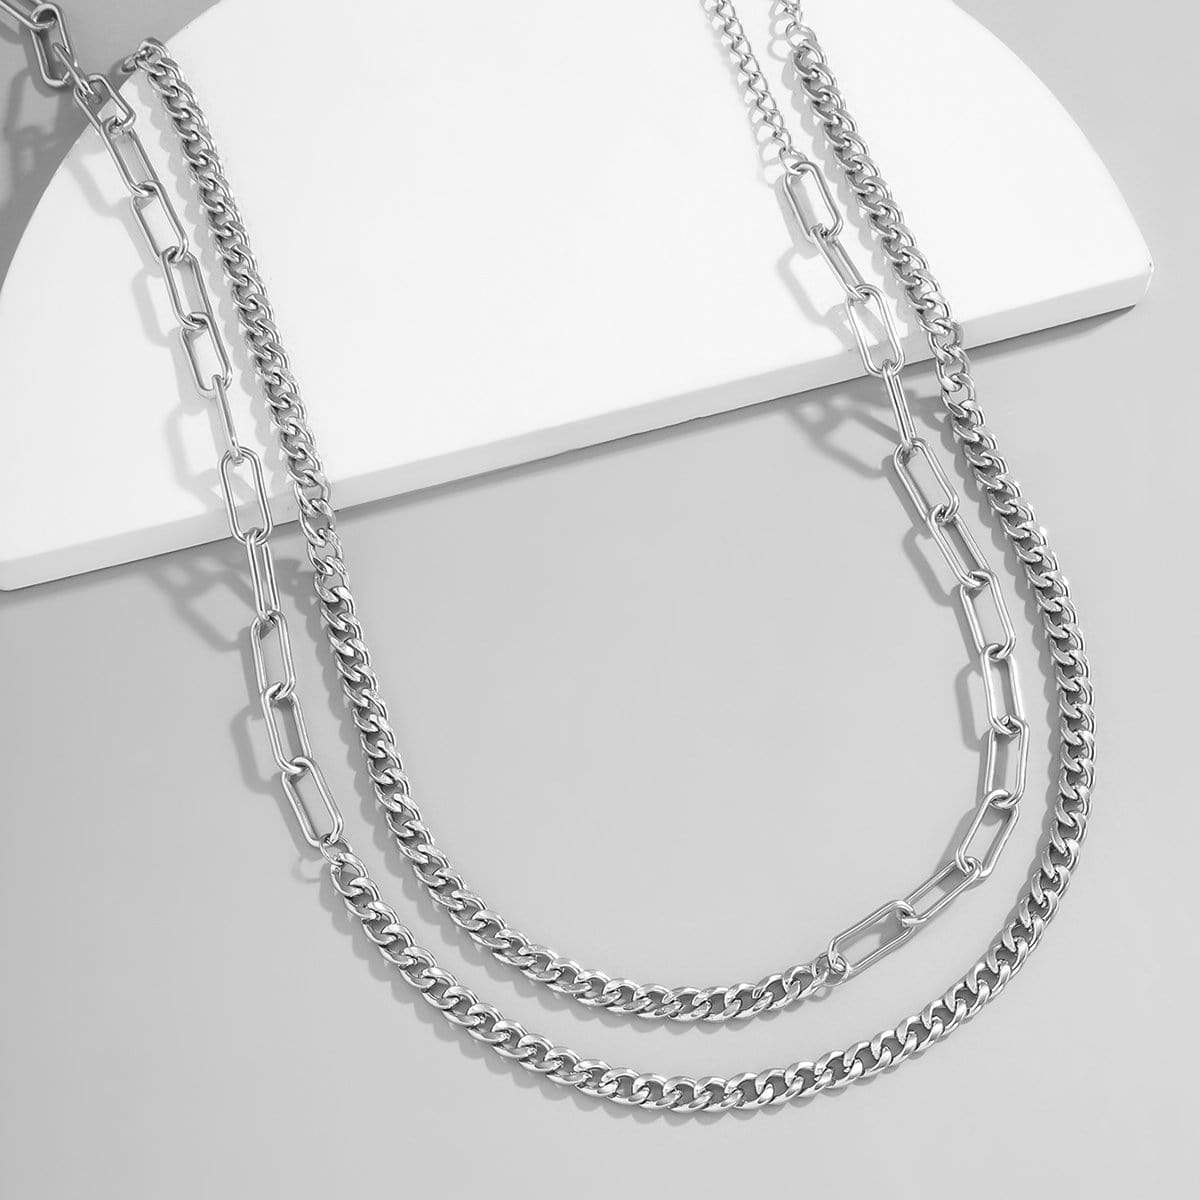 Stainless Steel Layered Curb Link Chain Necklace Set